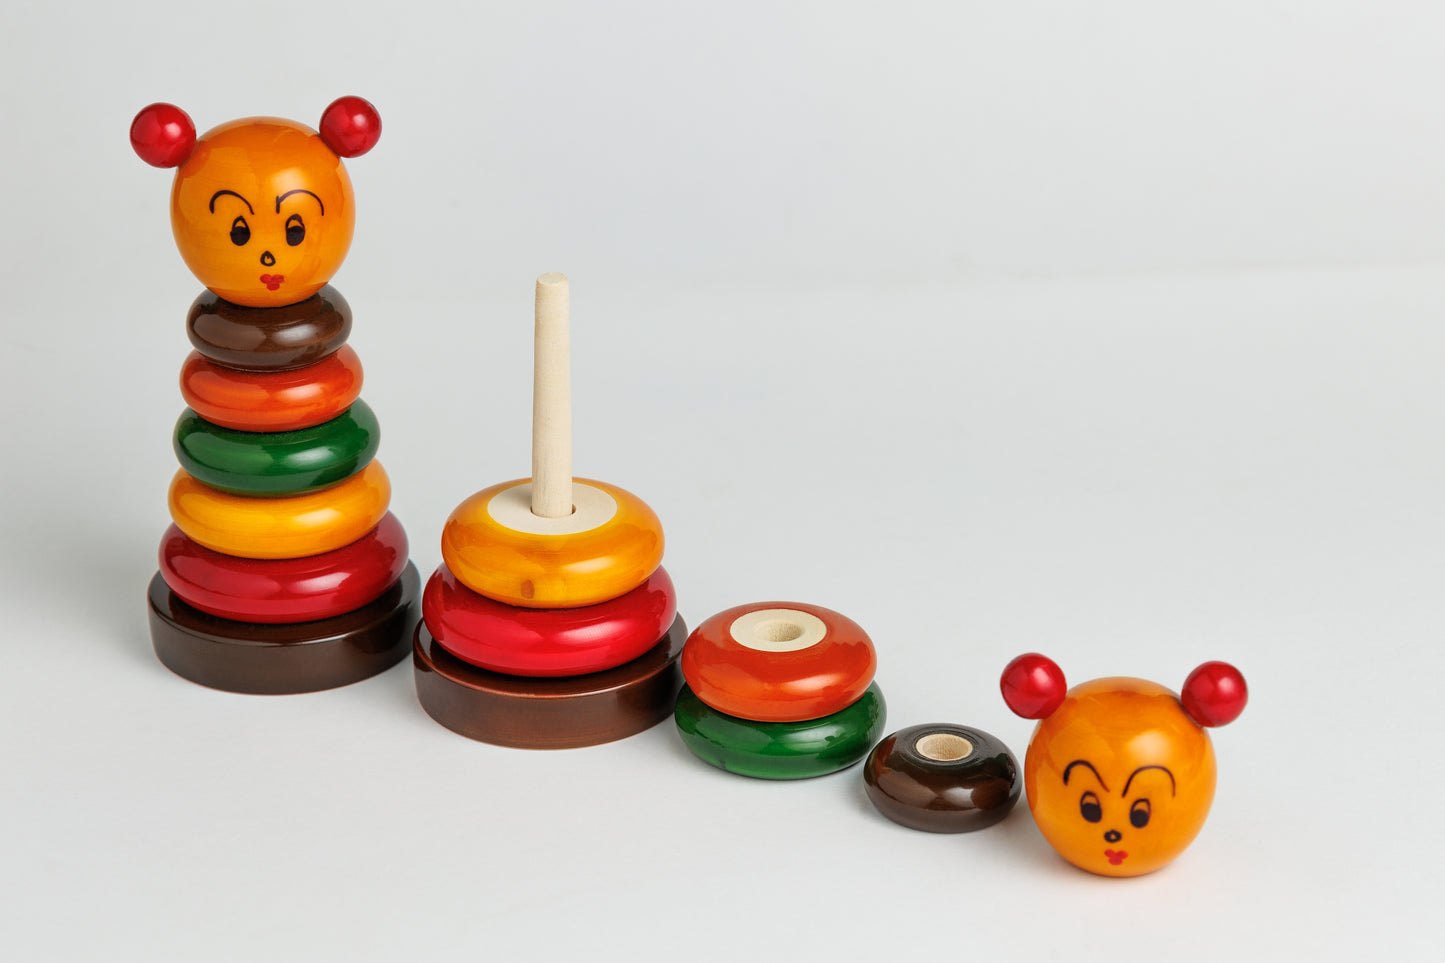 Montessori Wooden Stacking Rings Toy